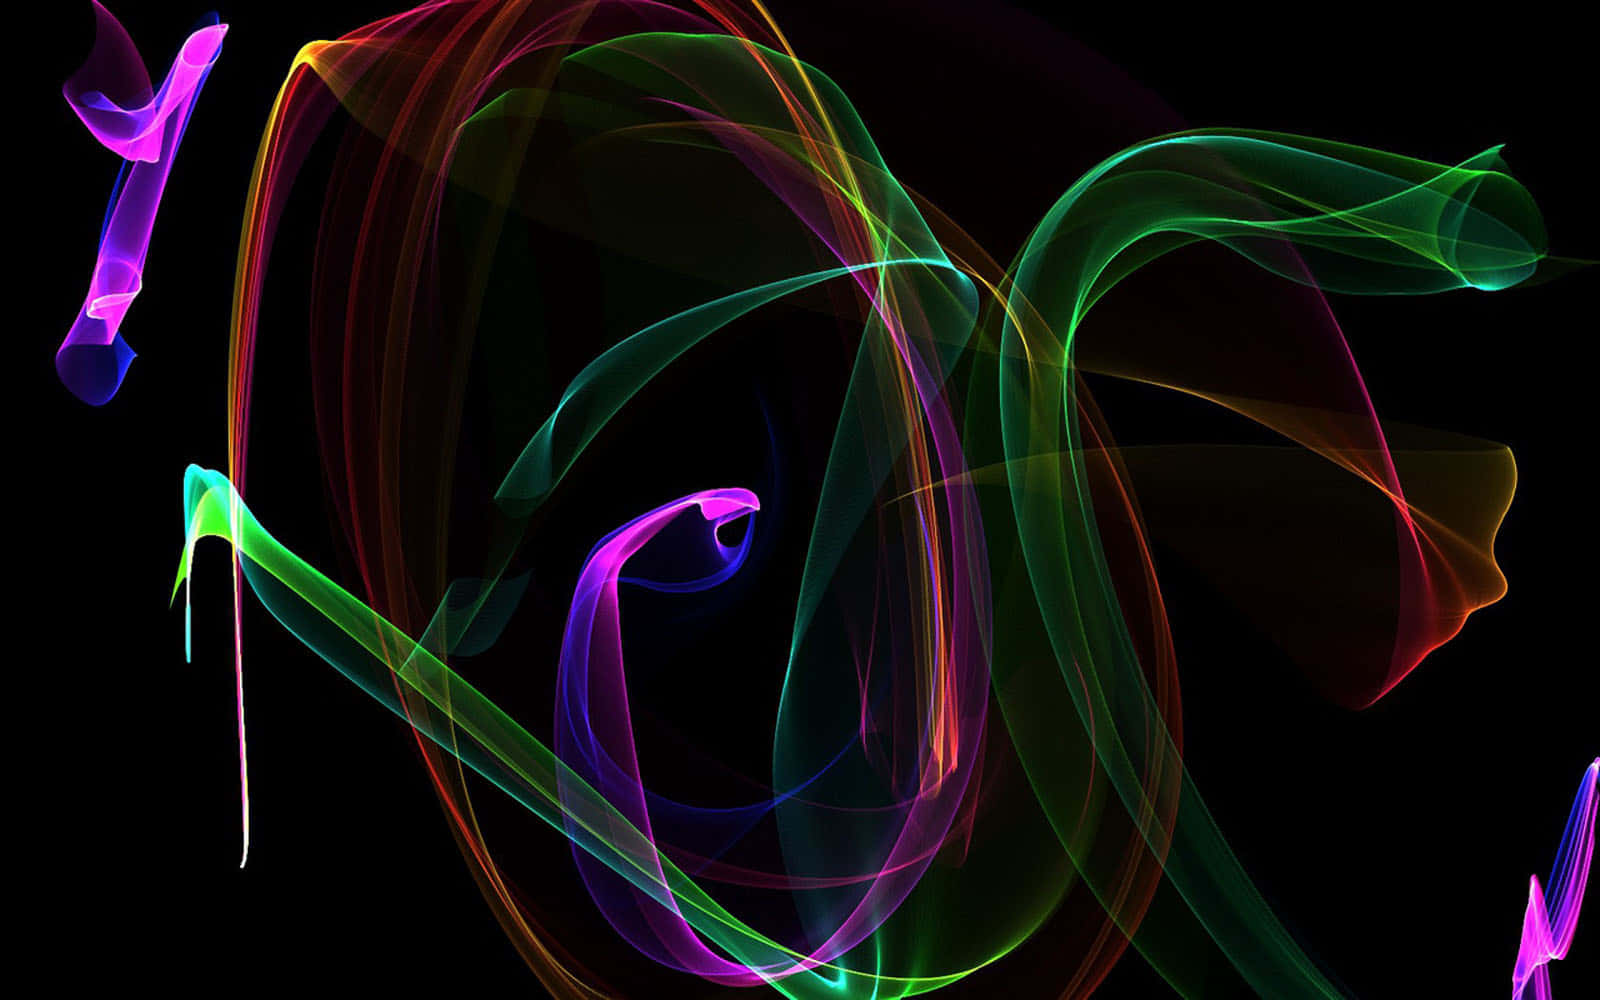 A bright, abstract neon pattern filling the screen. Wallpaper